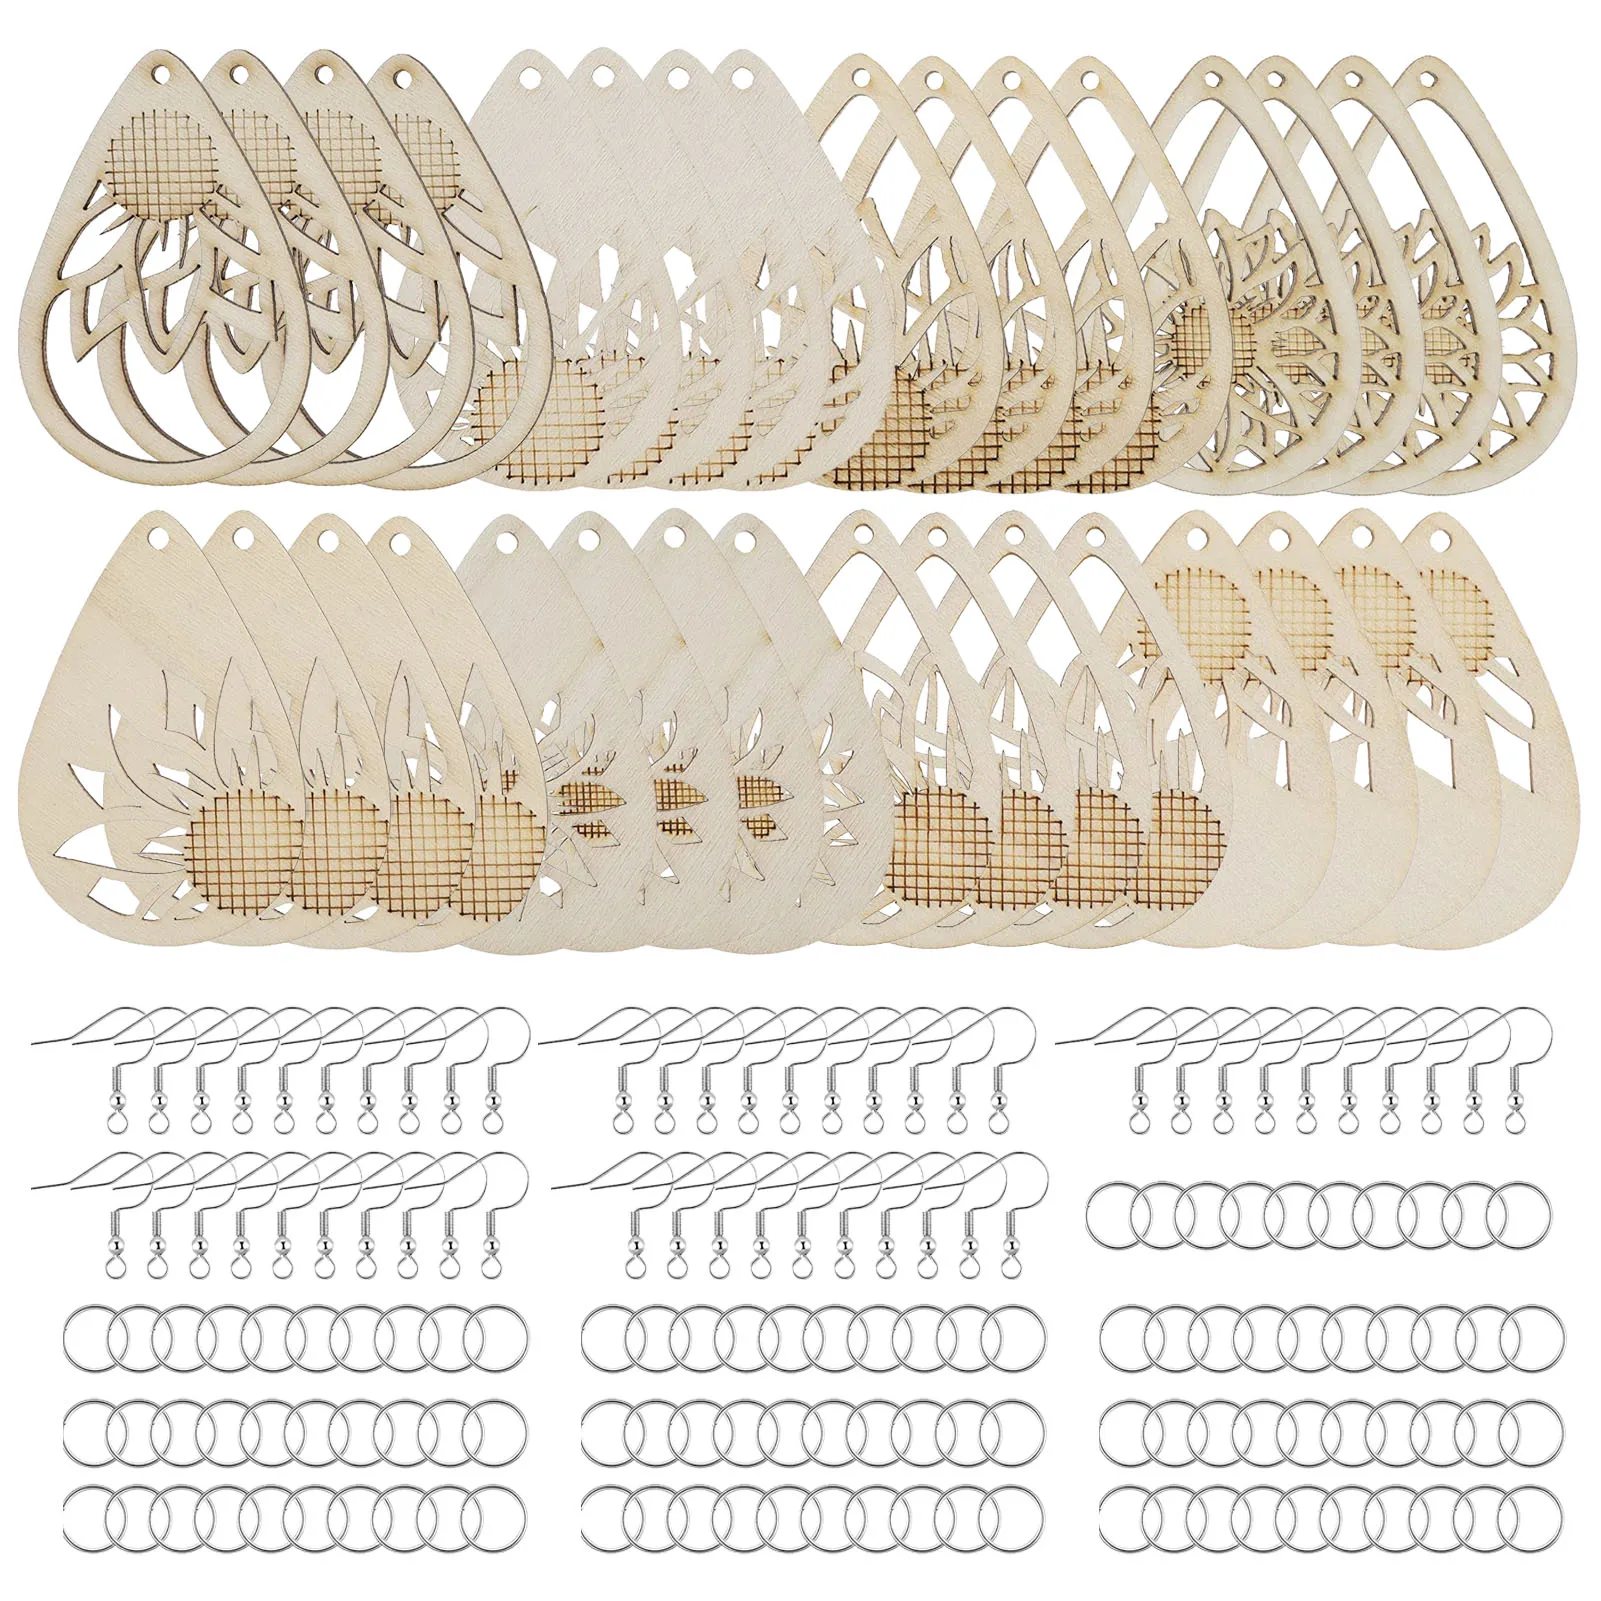 

182 Pieces Double-Sided Wood Blank Earrings Unfinished With Jump Rings Round Shapes Cutouts Kit For Women Girls DIY Crafts